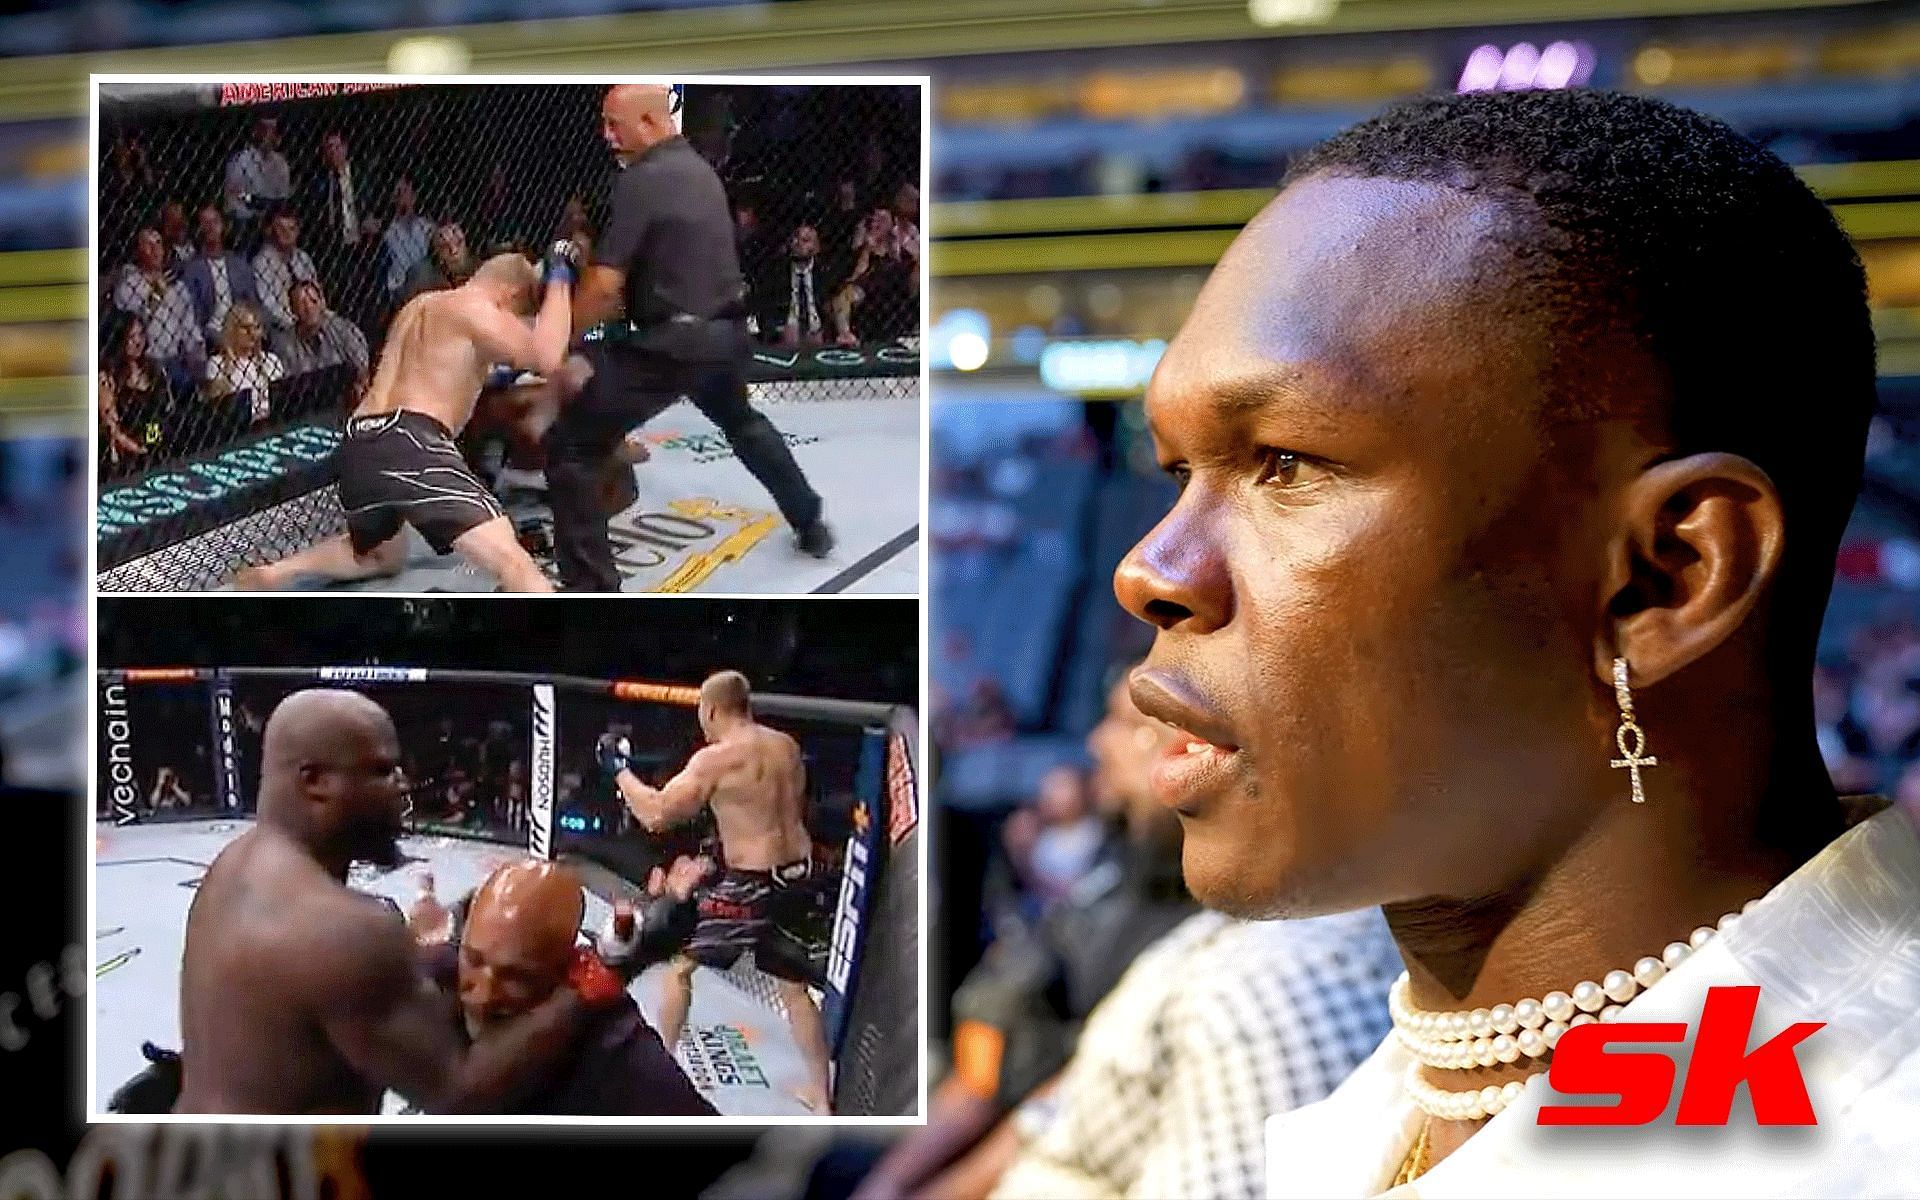 Israel Adesanya was unhappy with &quot;early stoppage&quot; in Derrick Lewis vs. Sergei Pavlovich at UFC 277 [Adesanya image via FREESTYLEBENDER on YouTube and other images via @espnmma on Twitter]